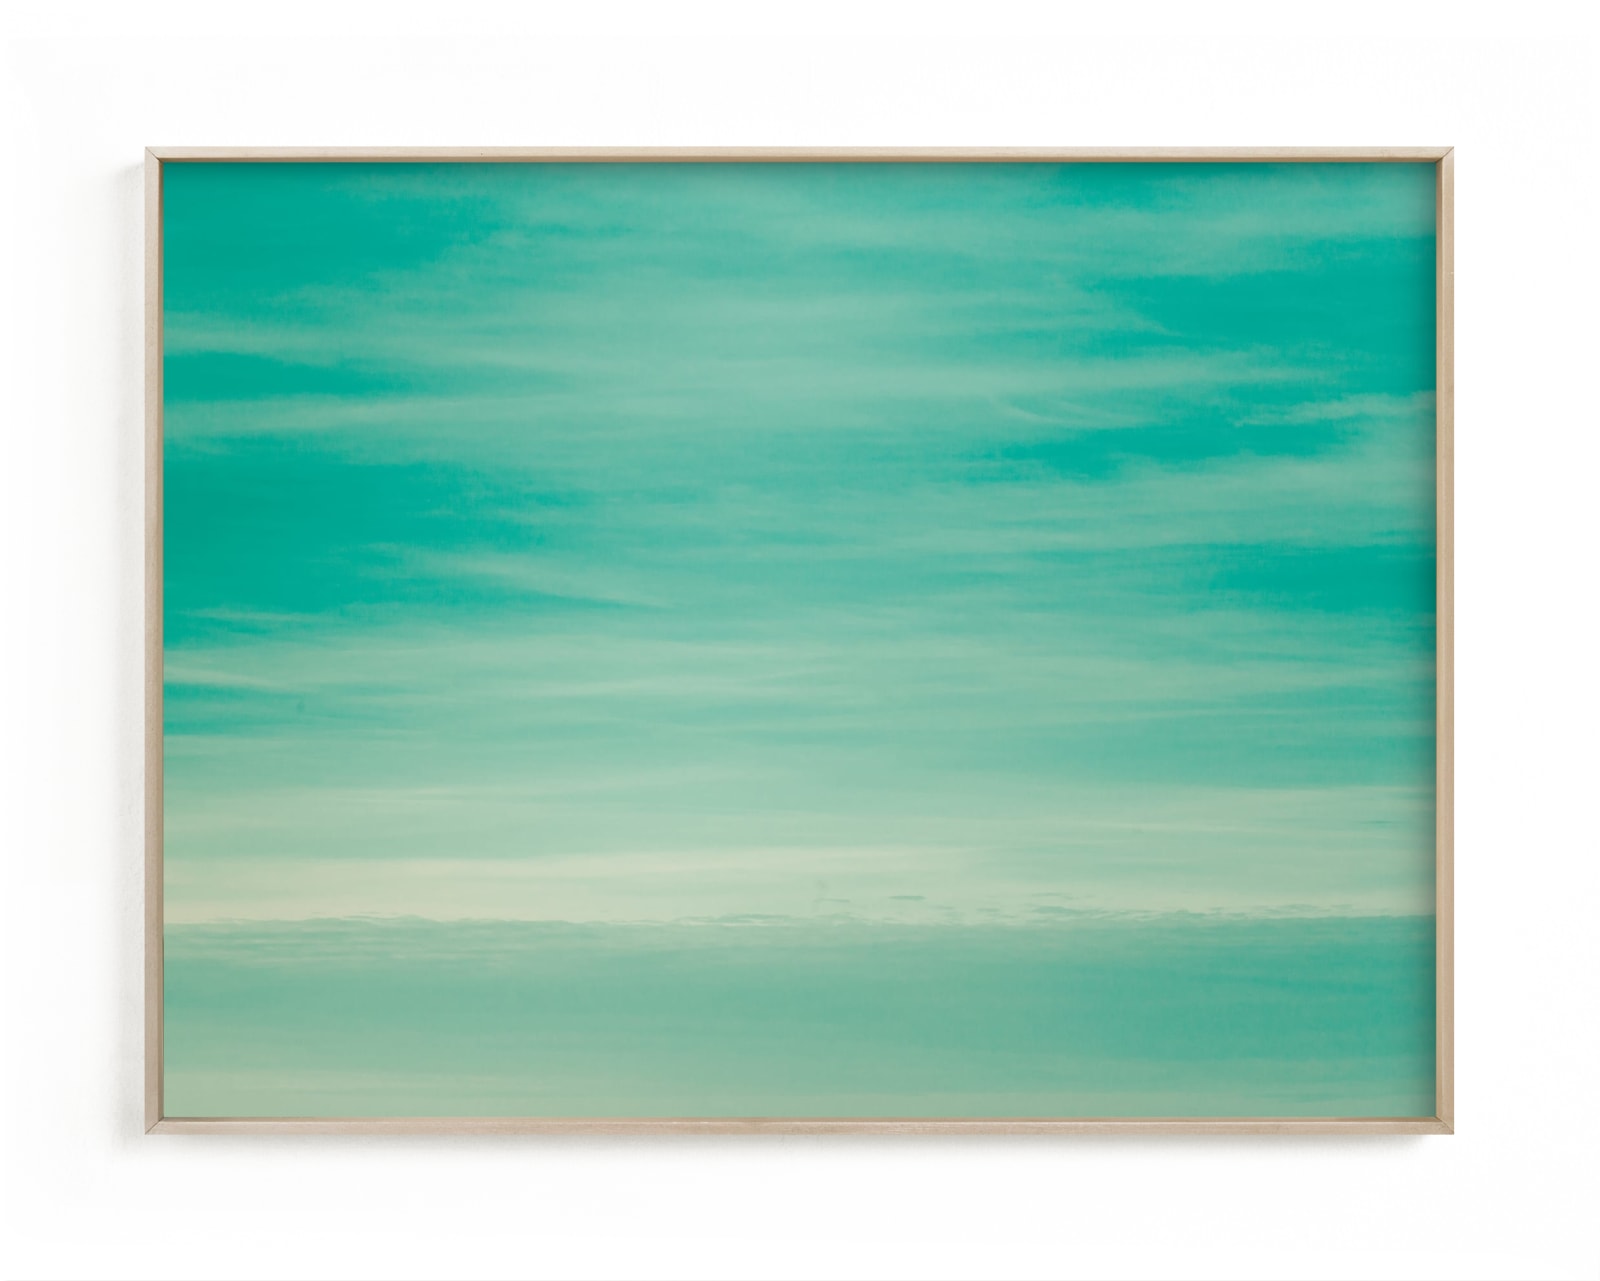 "Mint sky" by Lying on the grass in beautiful frame options and a variety of sizes.